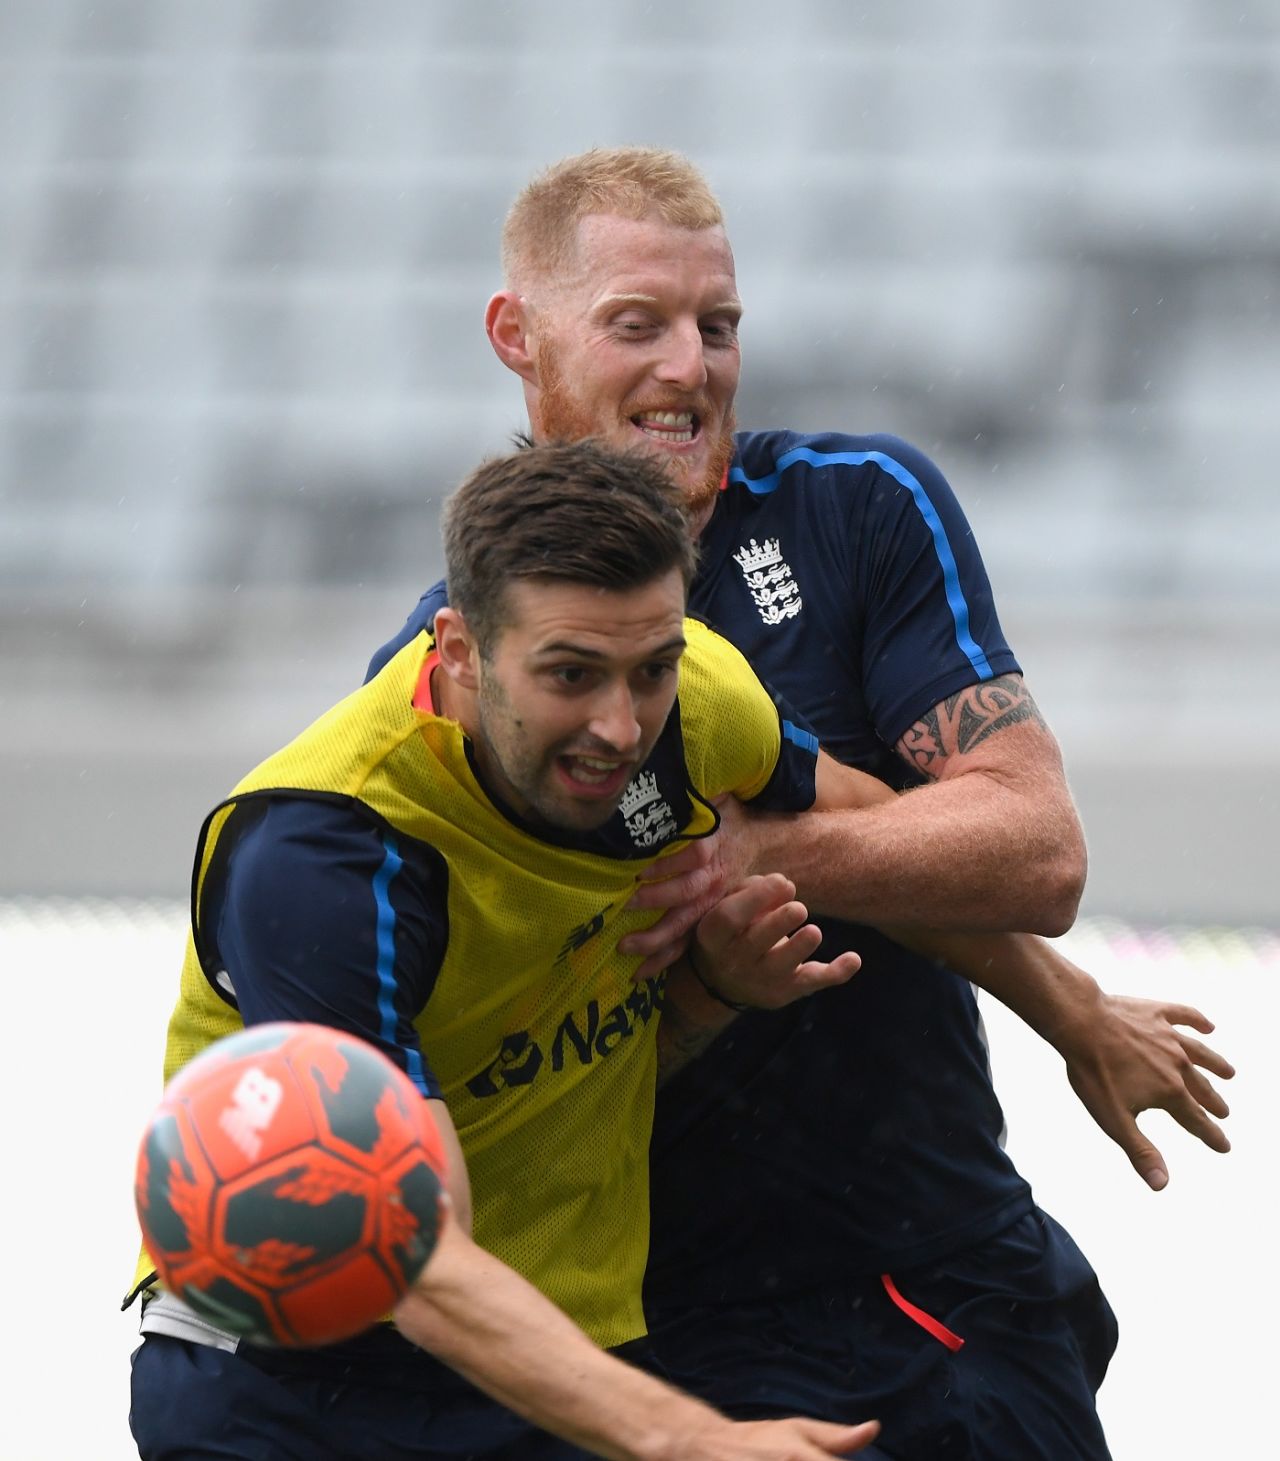 Ben Stokes and Mark Wood engage in some football, Auckland, March 21, 2018